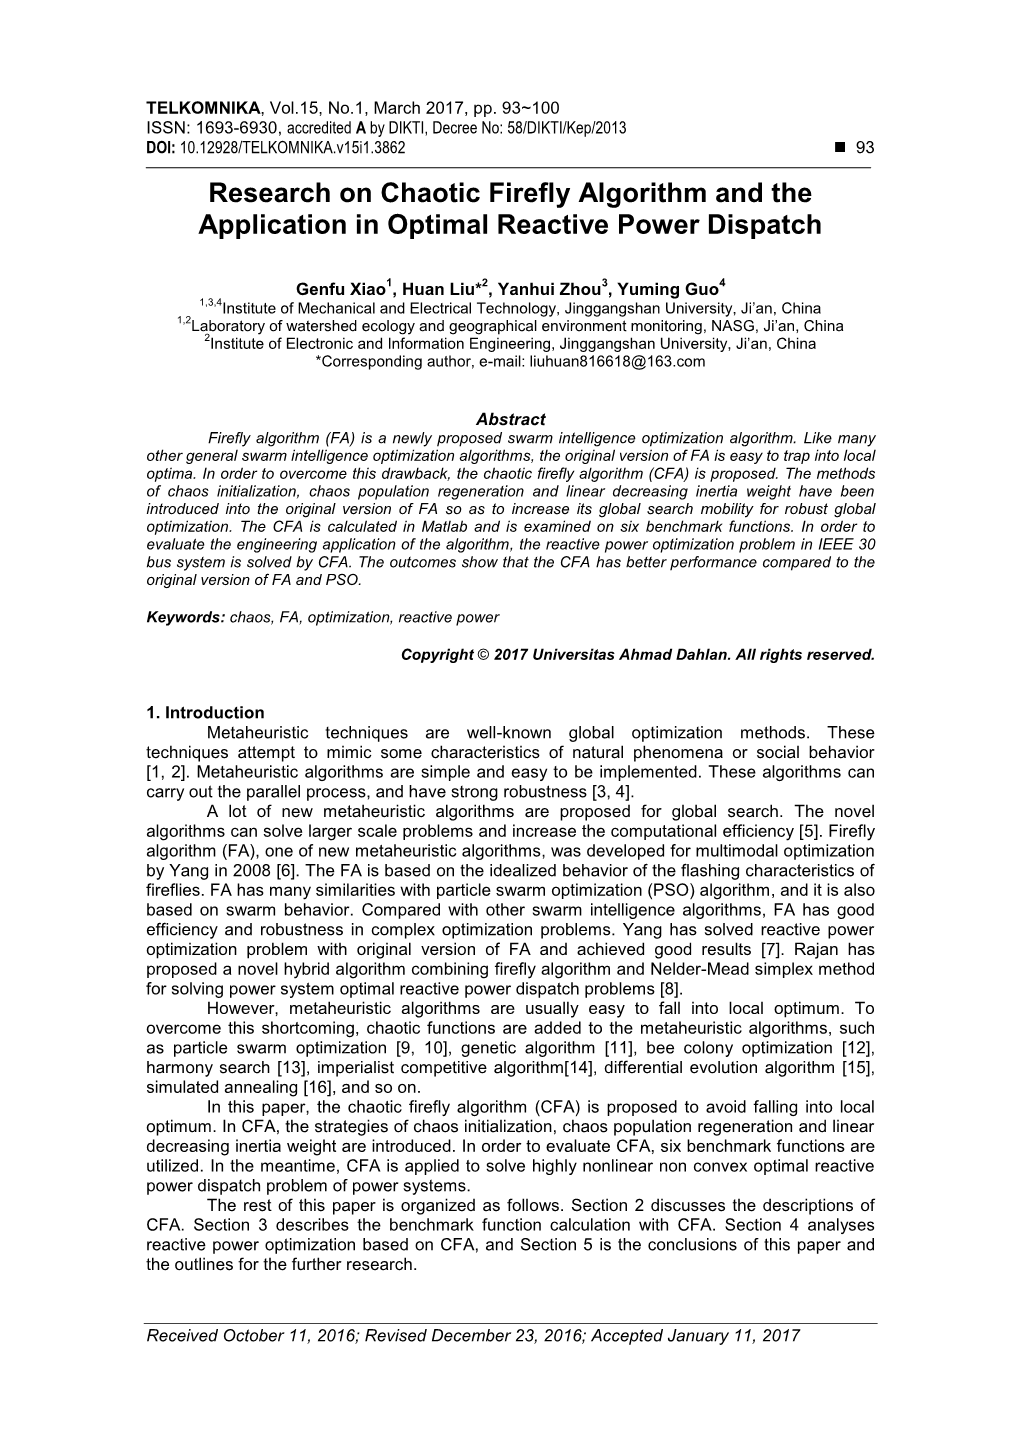 Research on Chaotic Firefly Algorithm and the Application in Optimal Reactive Power Dispatch